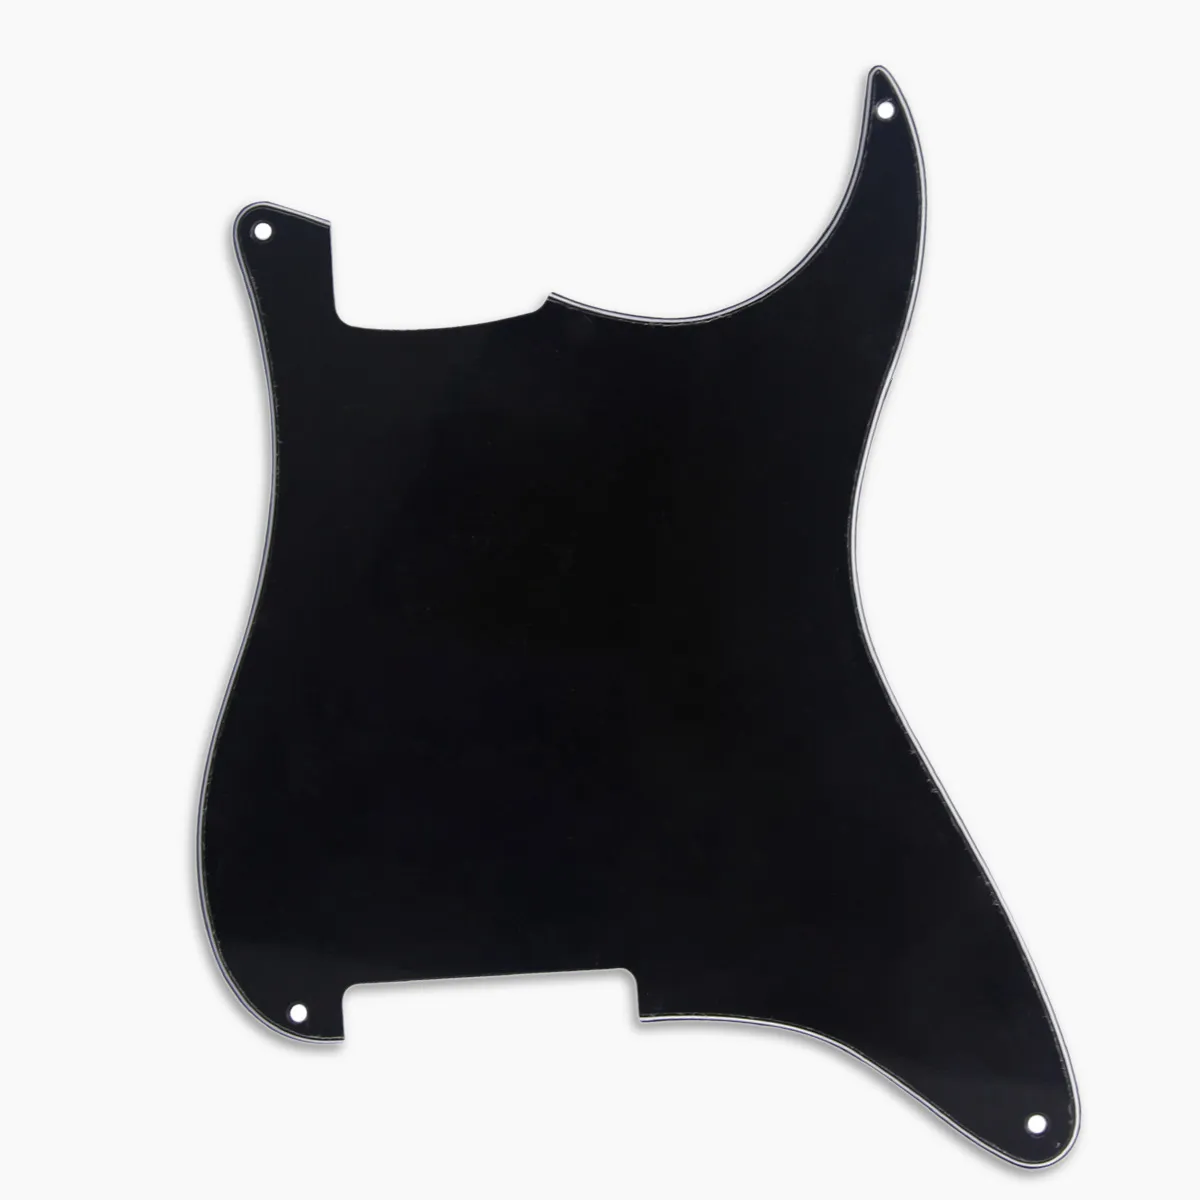 1PC 3Ply Guitar Blank Pickguard Scratch Plate 4 Hole with Screws for Guitar Accessories Custom DIY Black